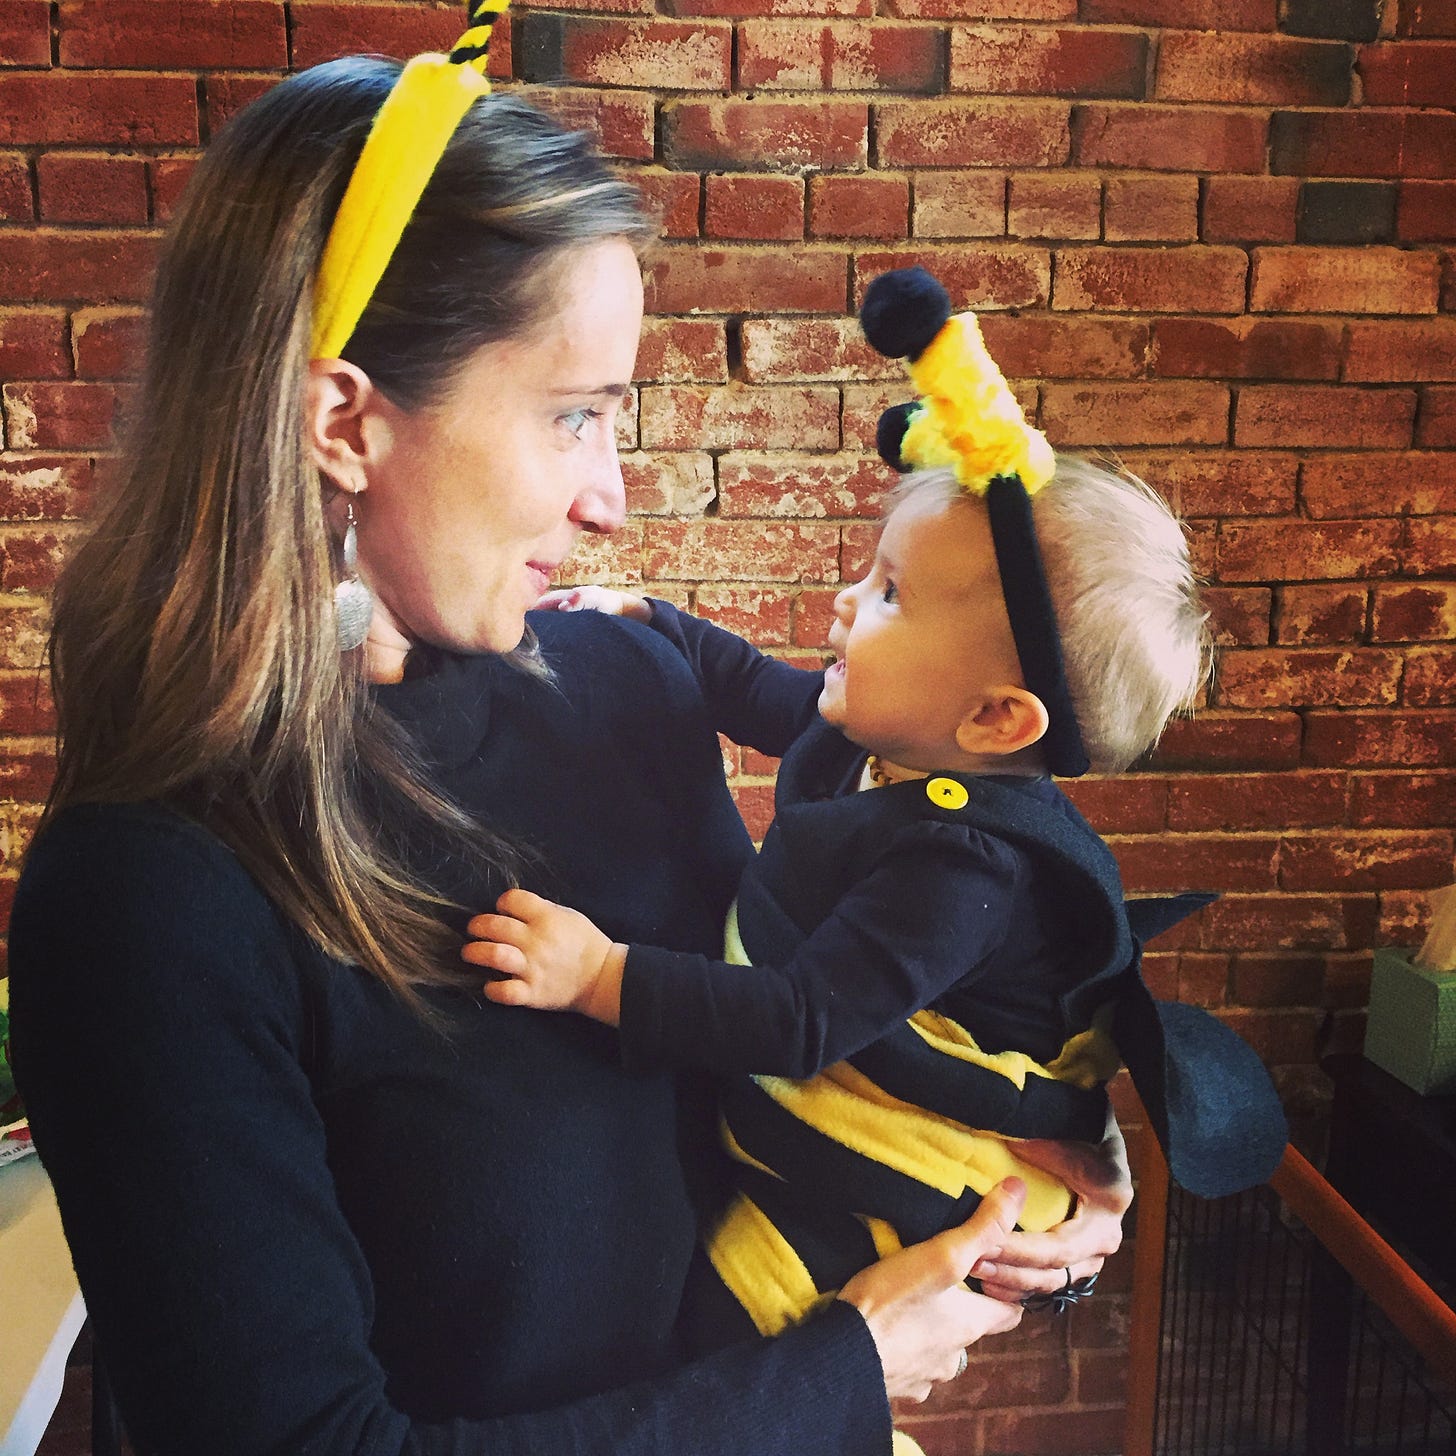 Kari, dressed in all black with bee antenna headband holds a baby in a matching costume